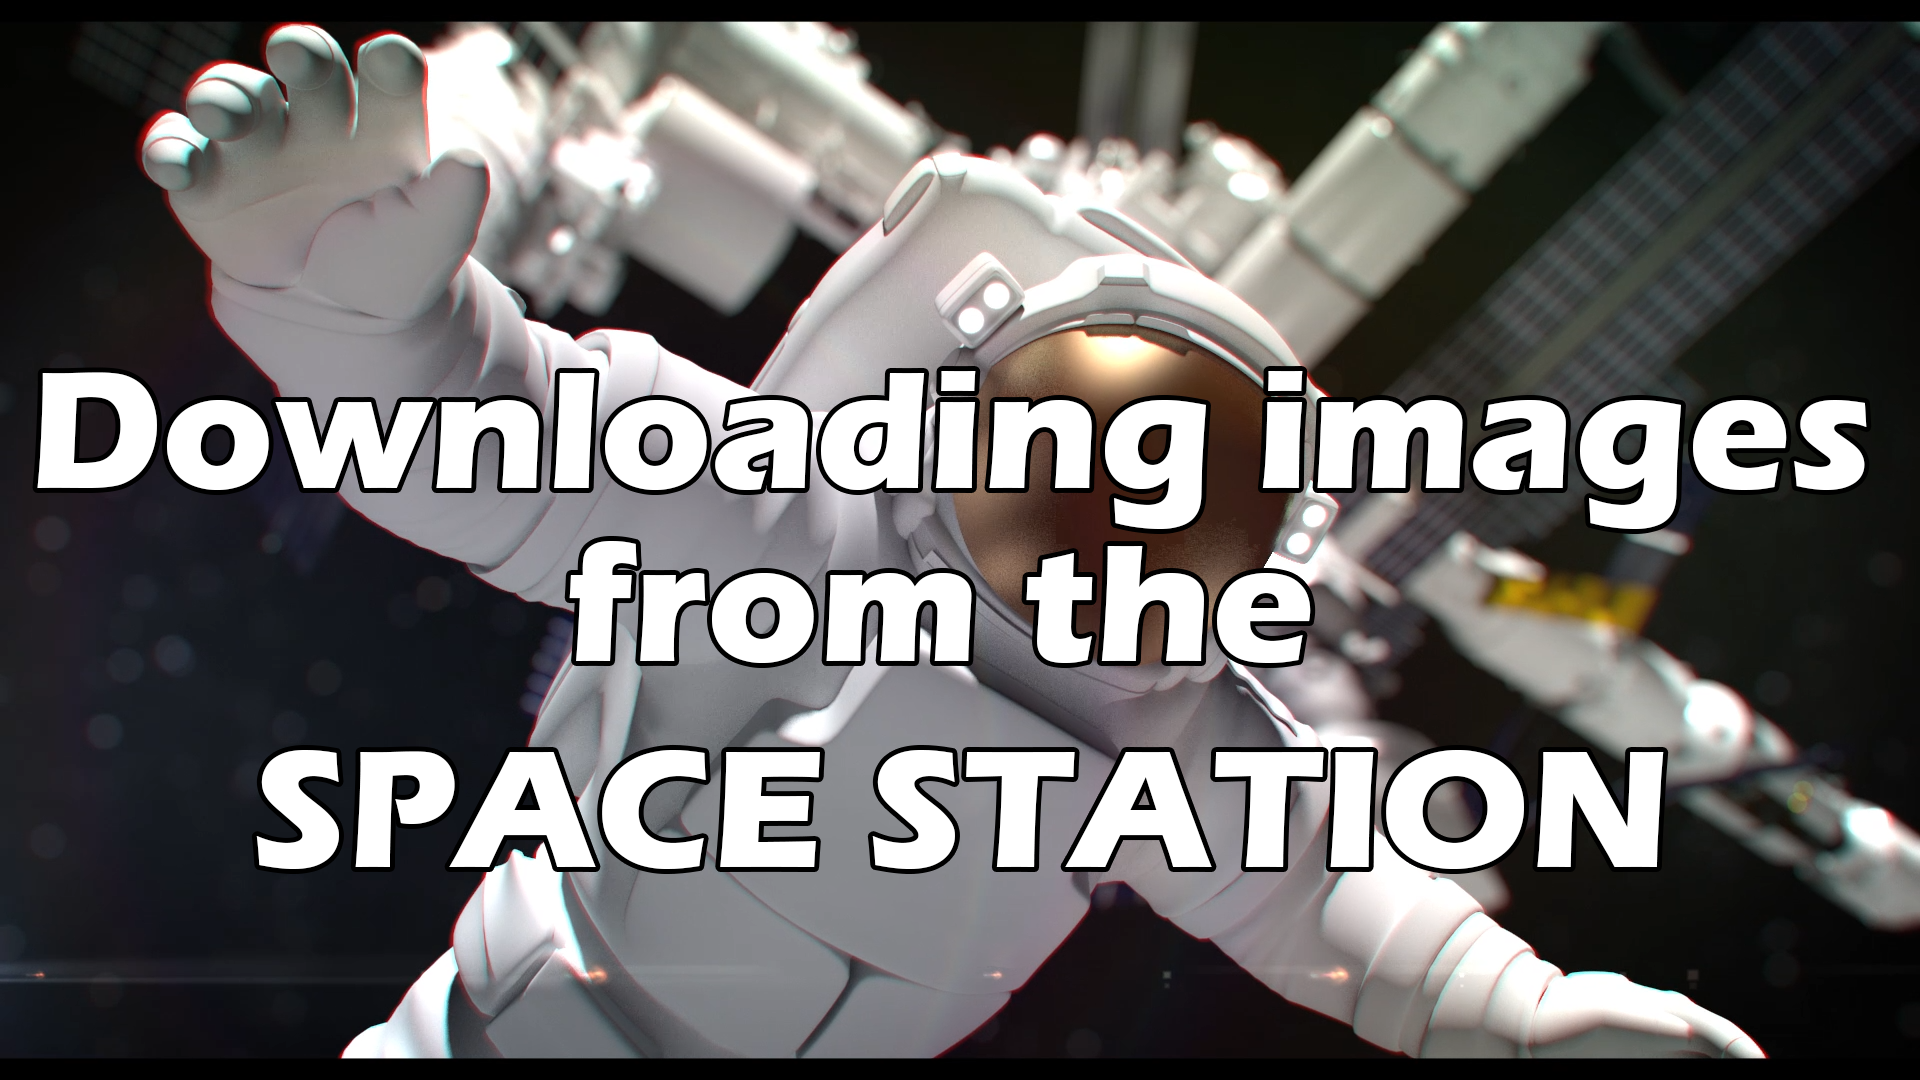 Downloading images from the SPACE STATION with a 22$ USB radio